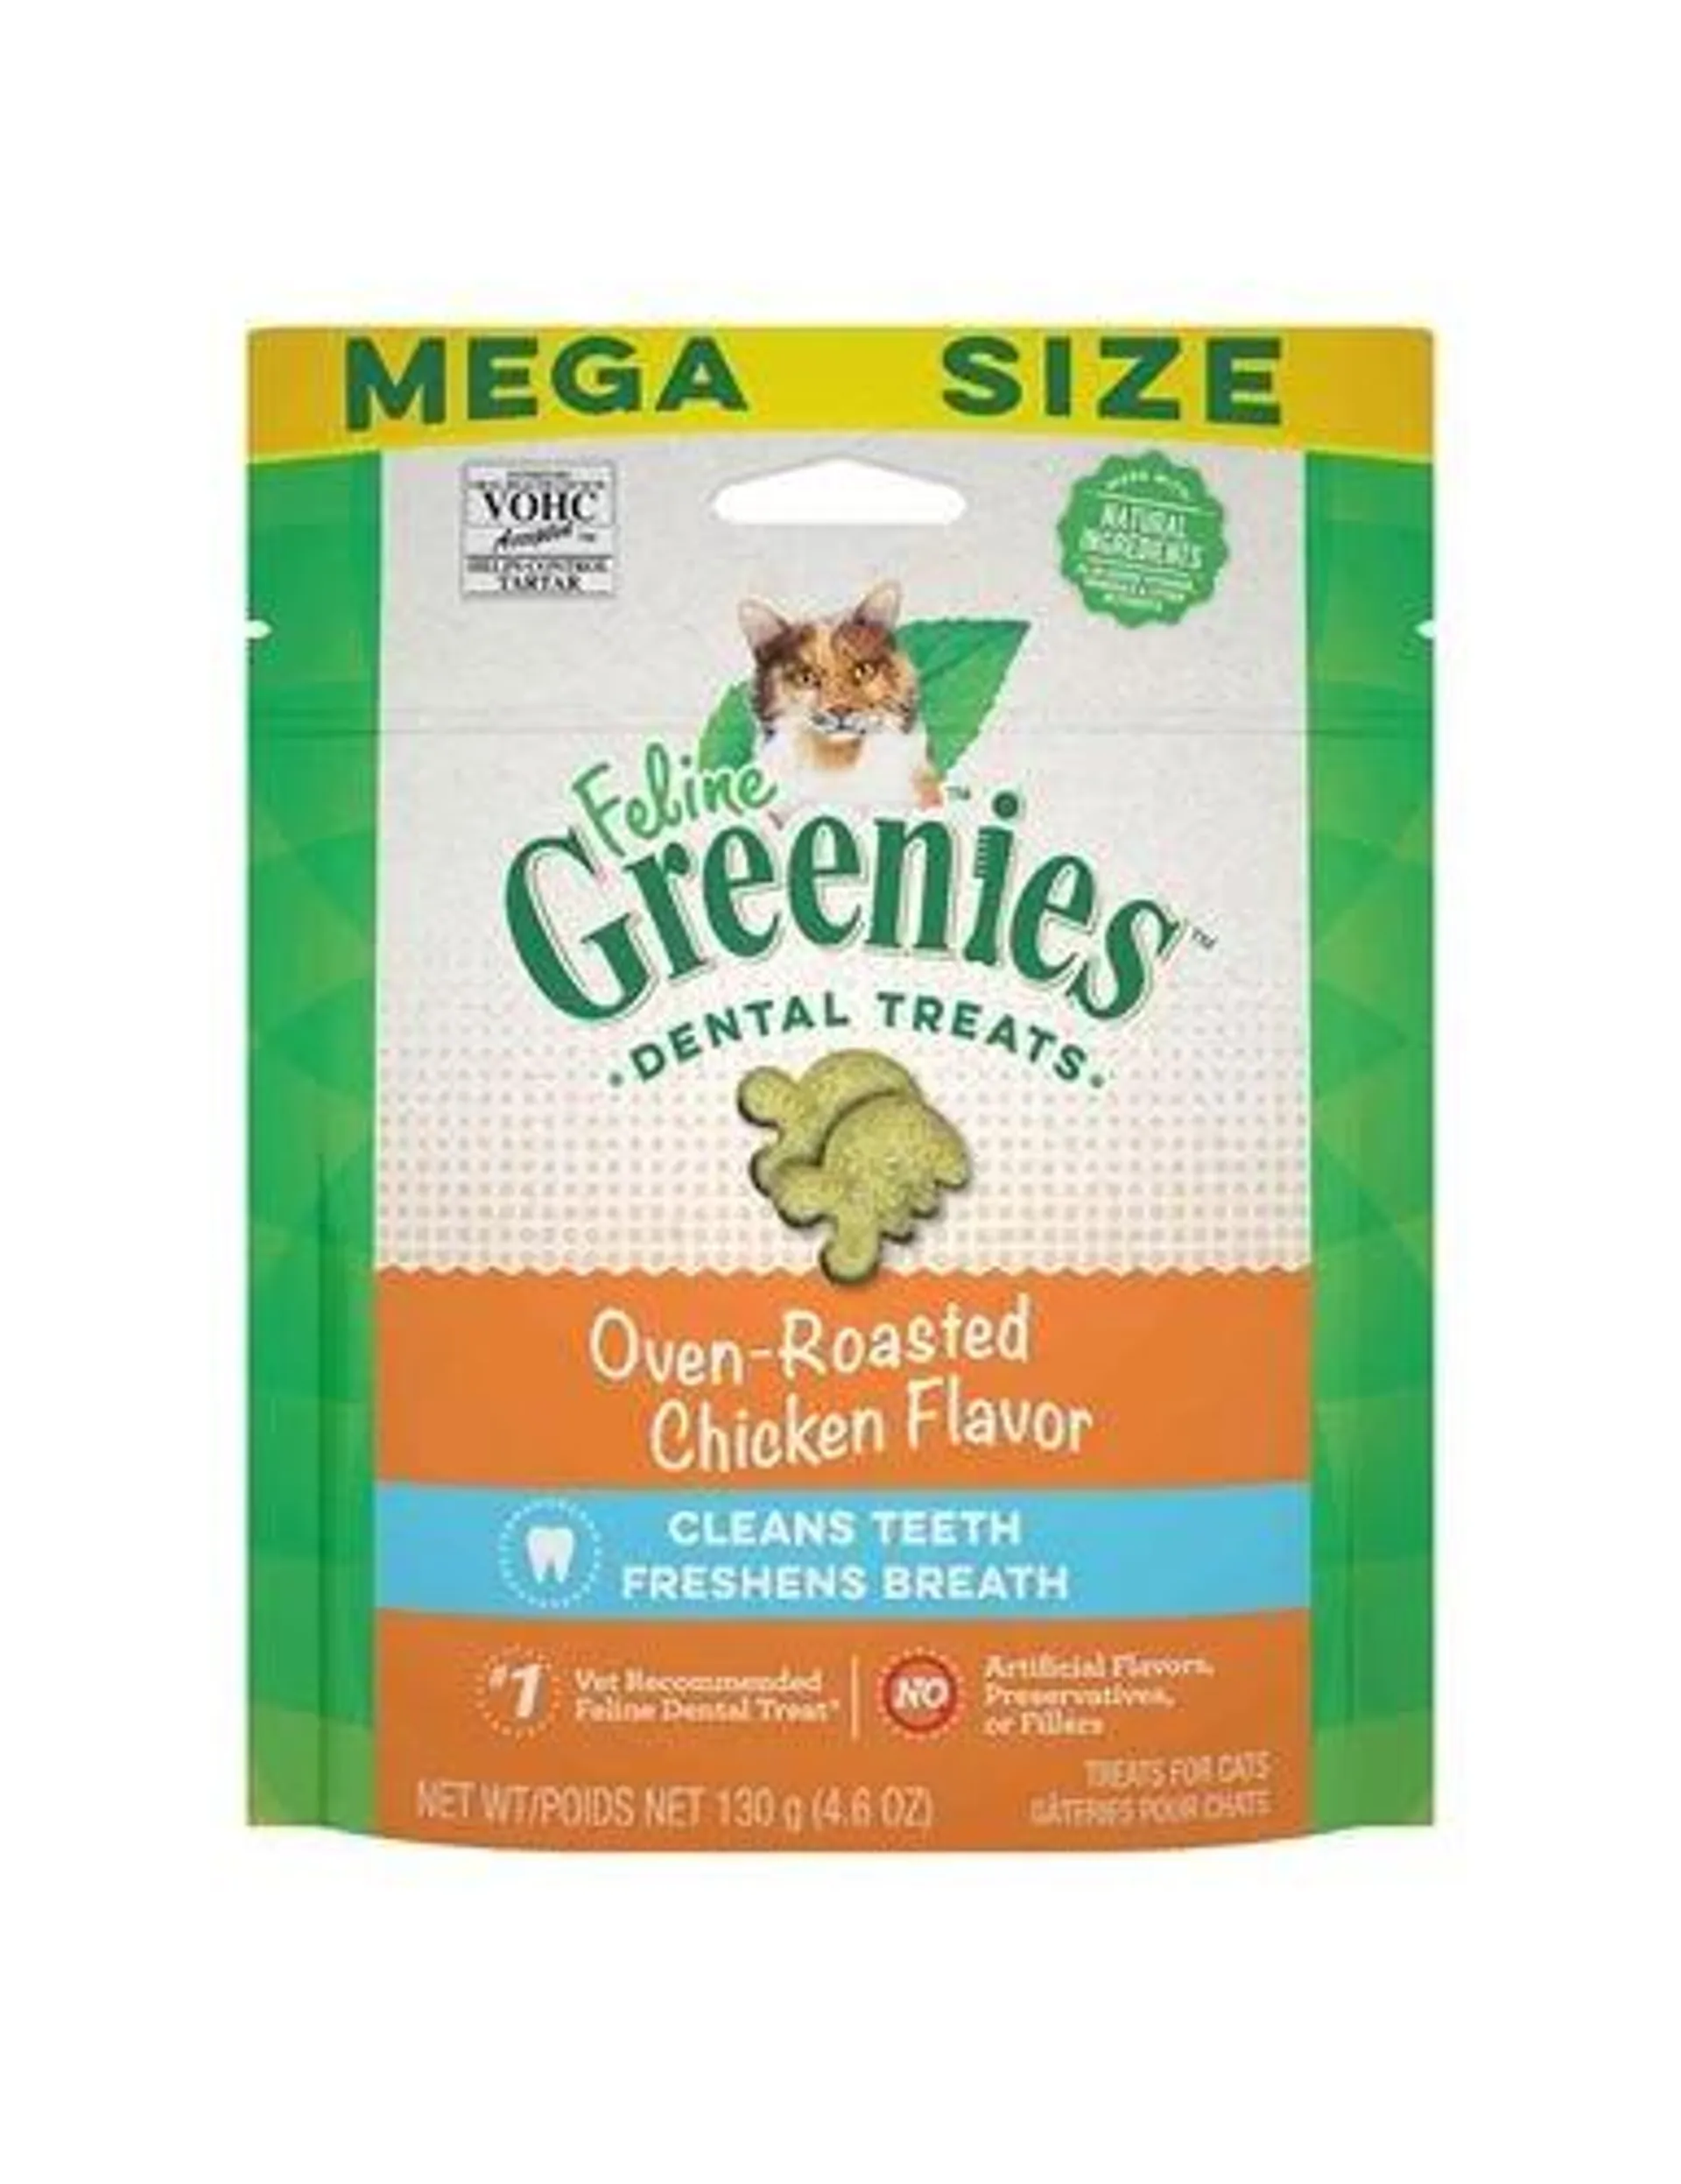 FELINE GREENIES Adult Natural Dental Care Cat Treats, Oven Roasted Chicken Flavor, 4.6 Ounce Pouch